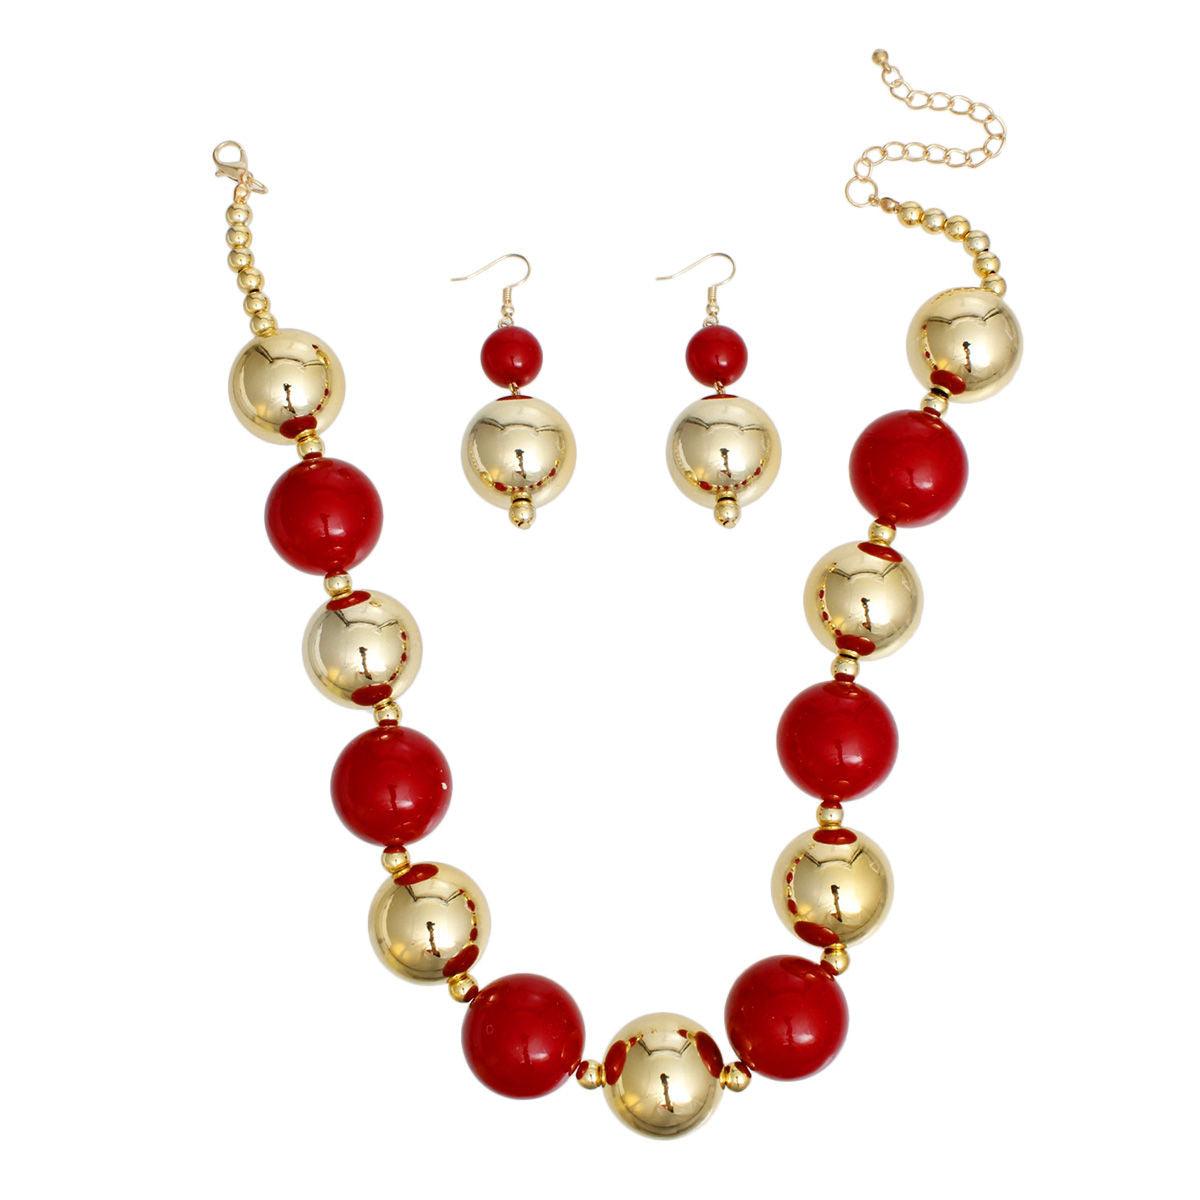 Bauble Pearl Red Gold Necklace Earrings Set - Level Up Your Fashion Jewelry Collection